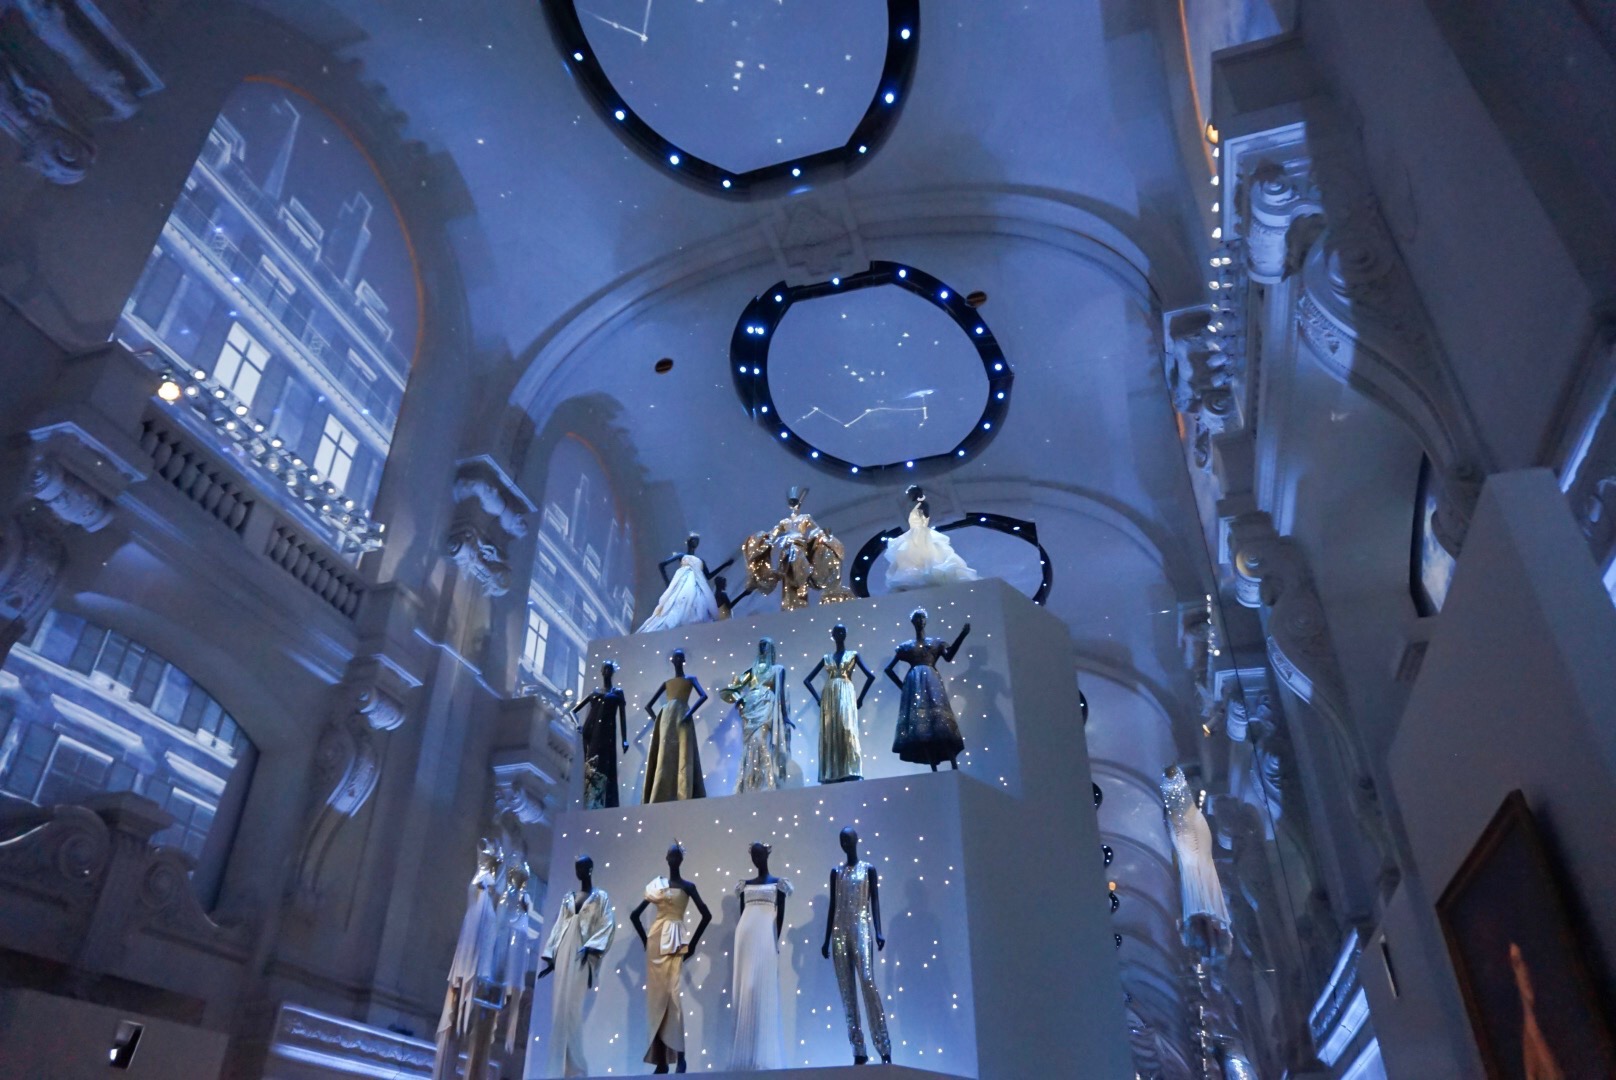 Christian Dior: Designer of Dreams Exhibition Takes You on a